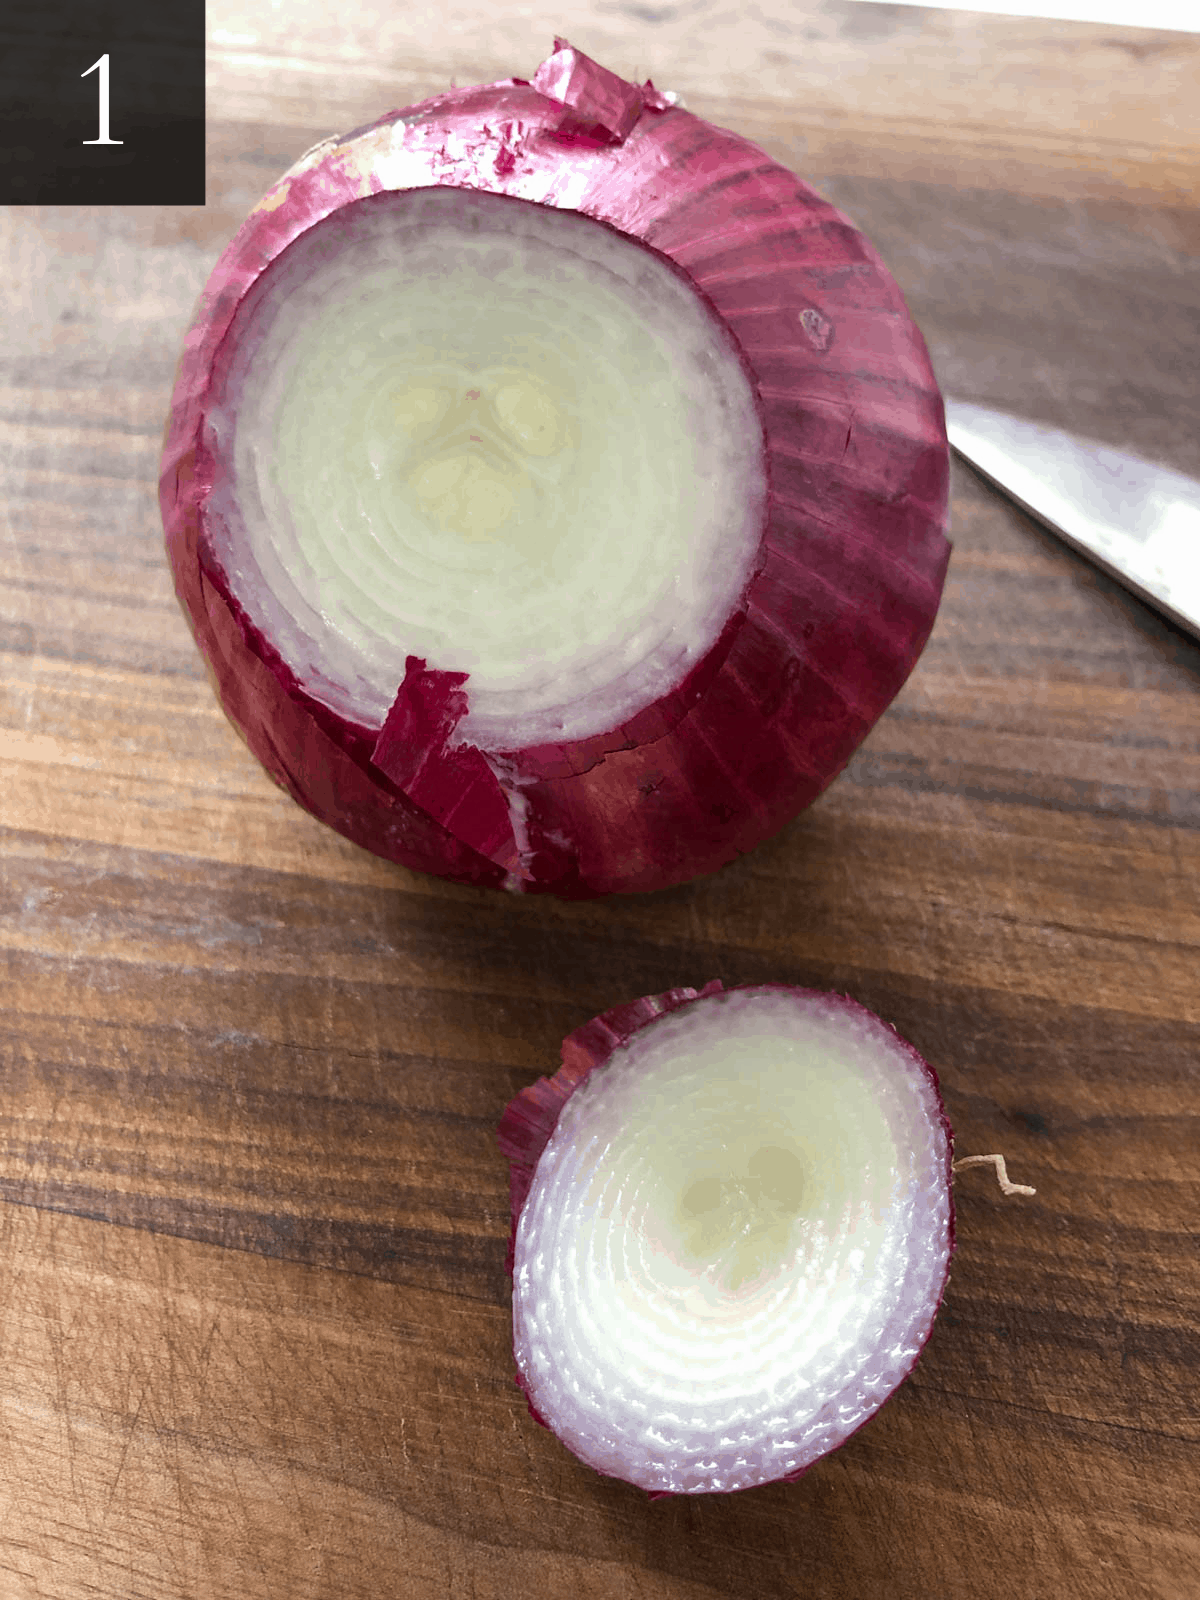 Cutting the top and bottom off of a red onion with a knife.